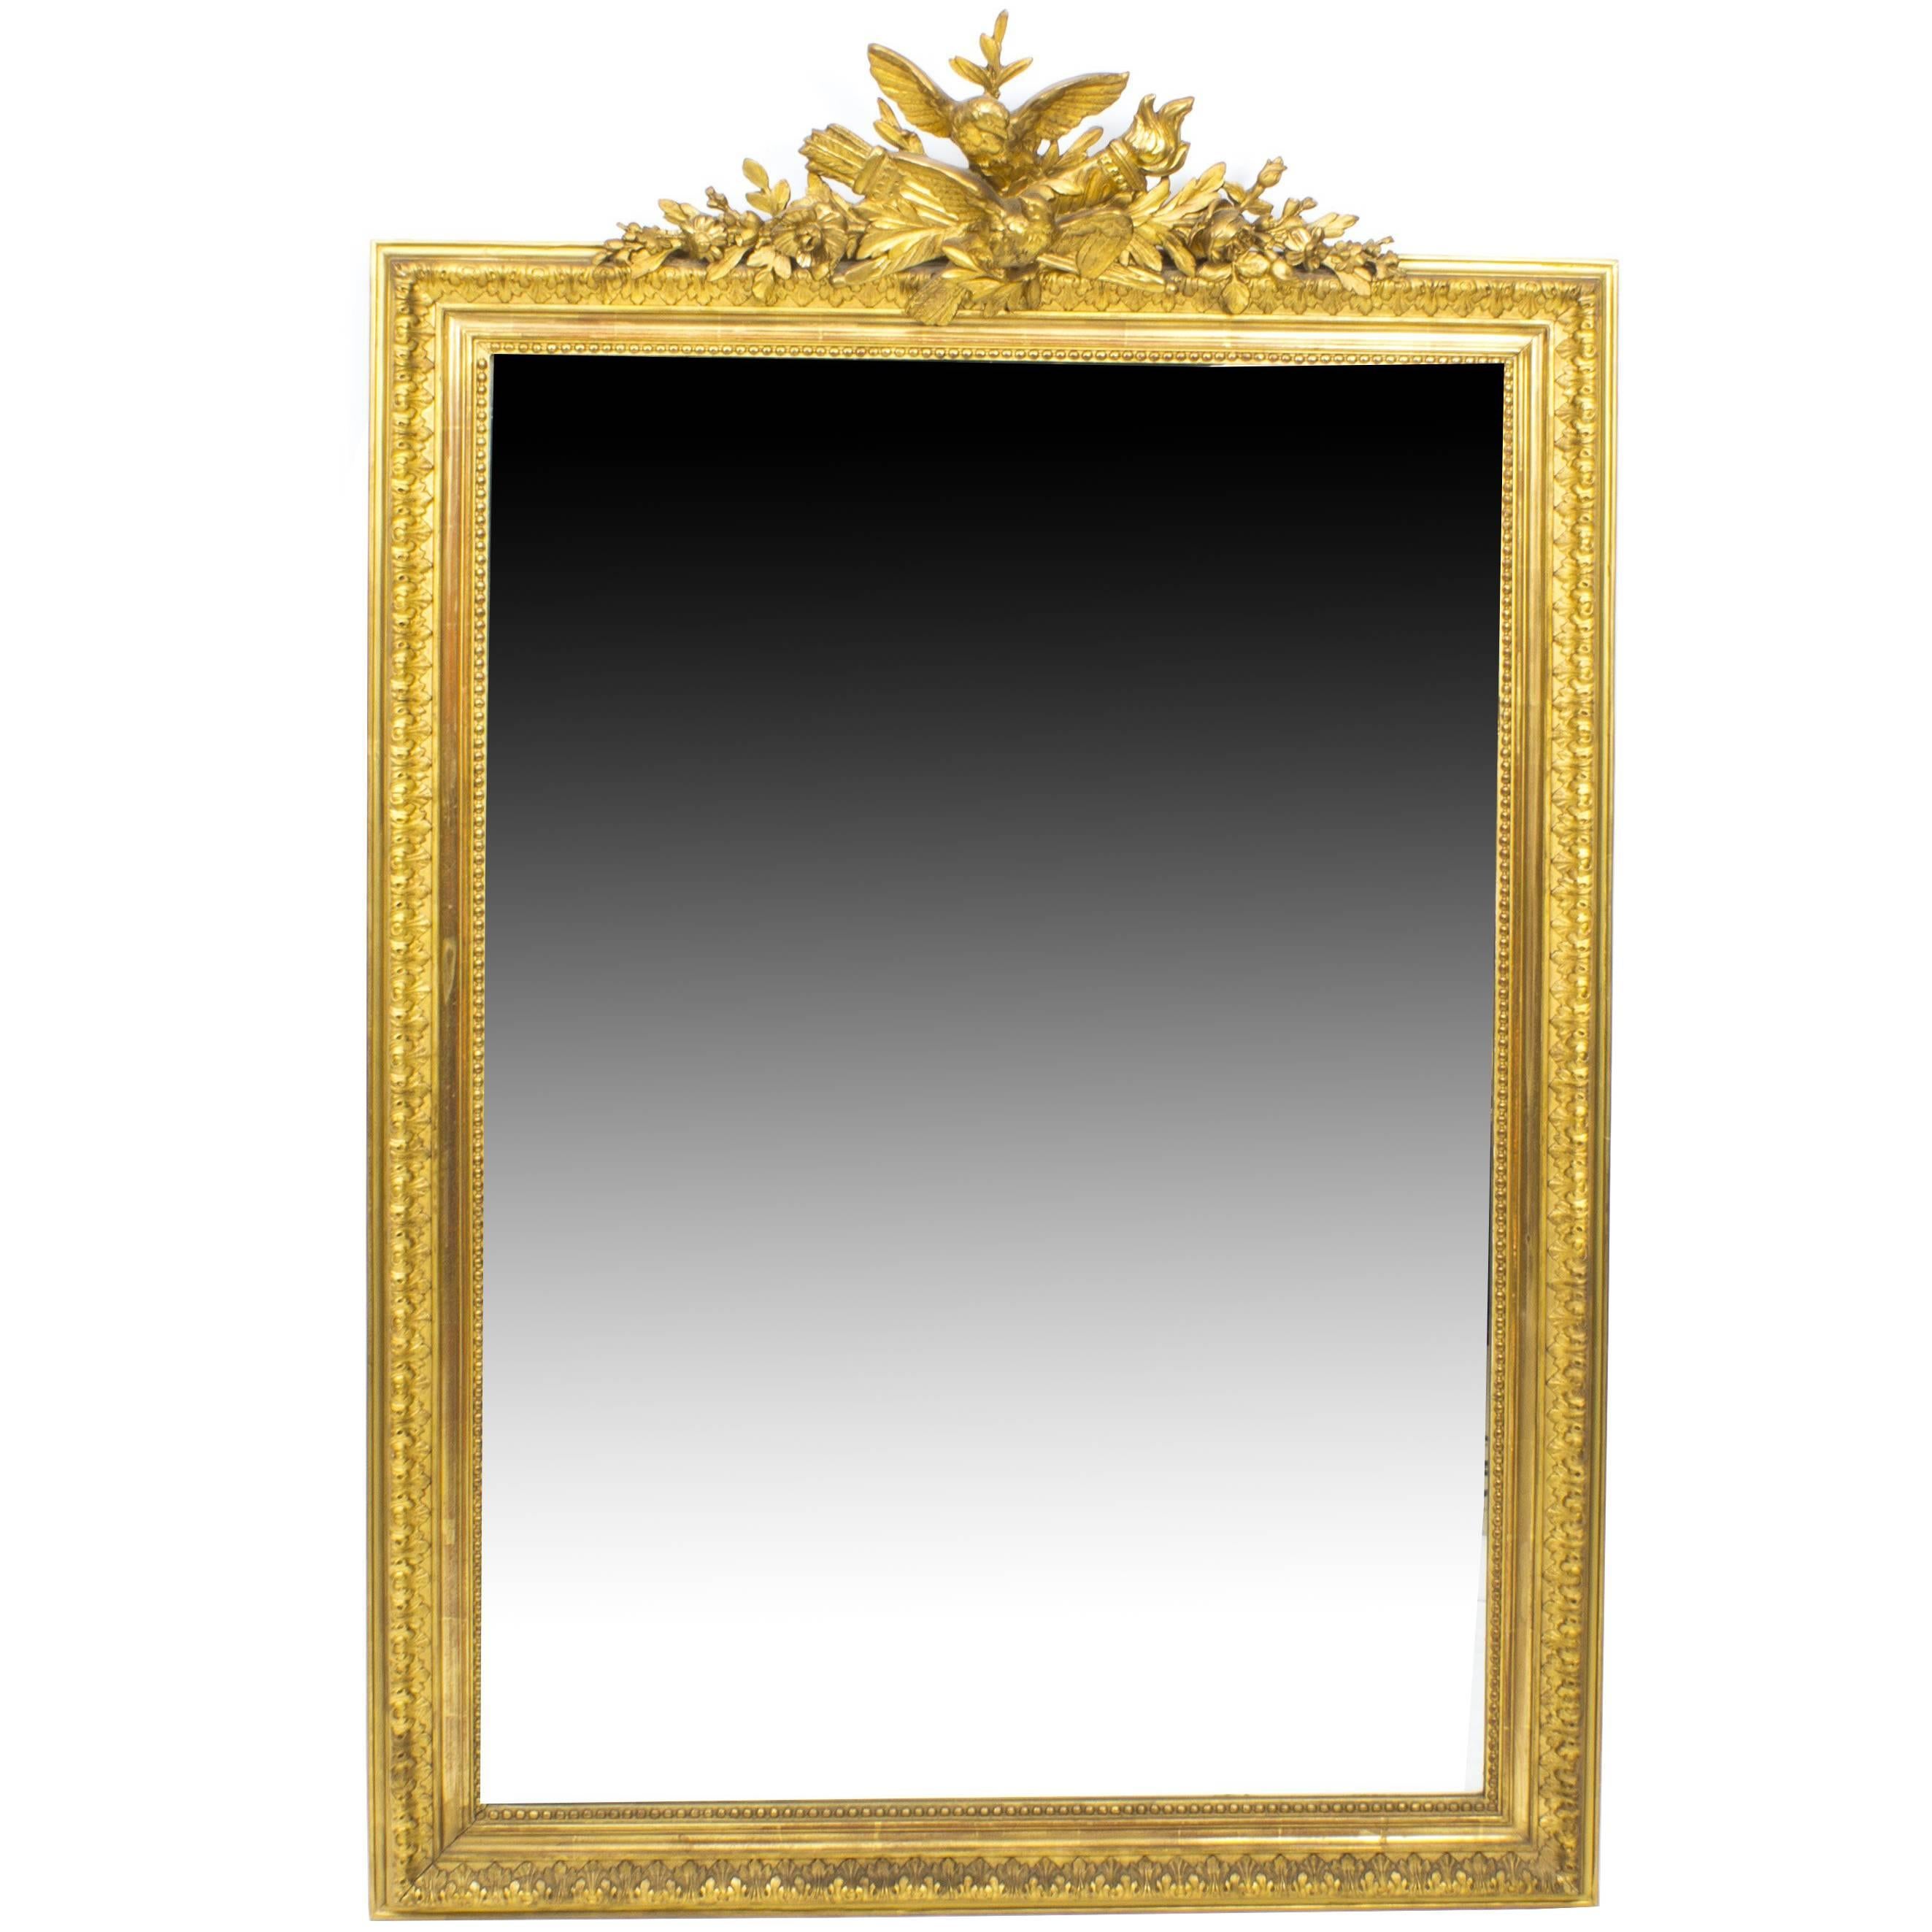 19th Century French Giltwood Overmantel Mirror